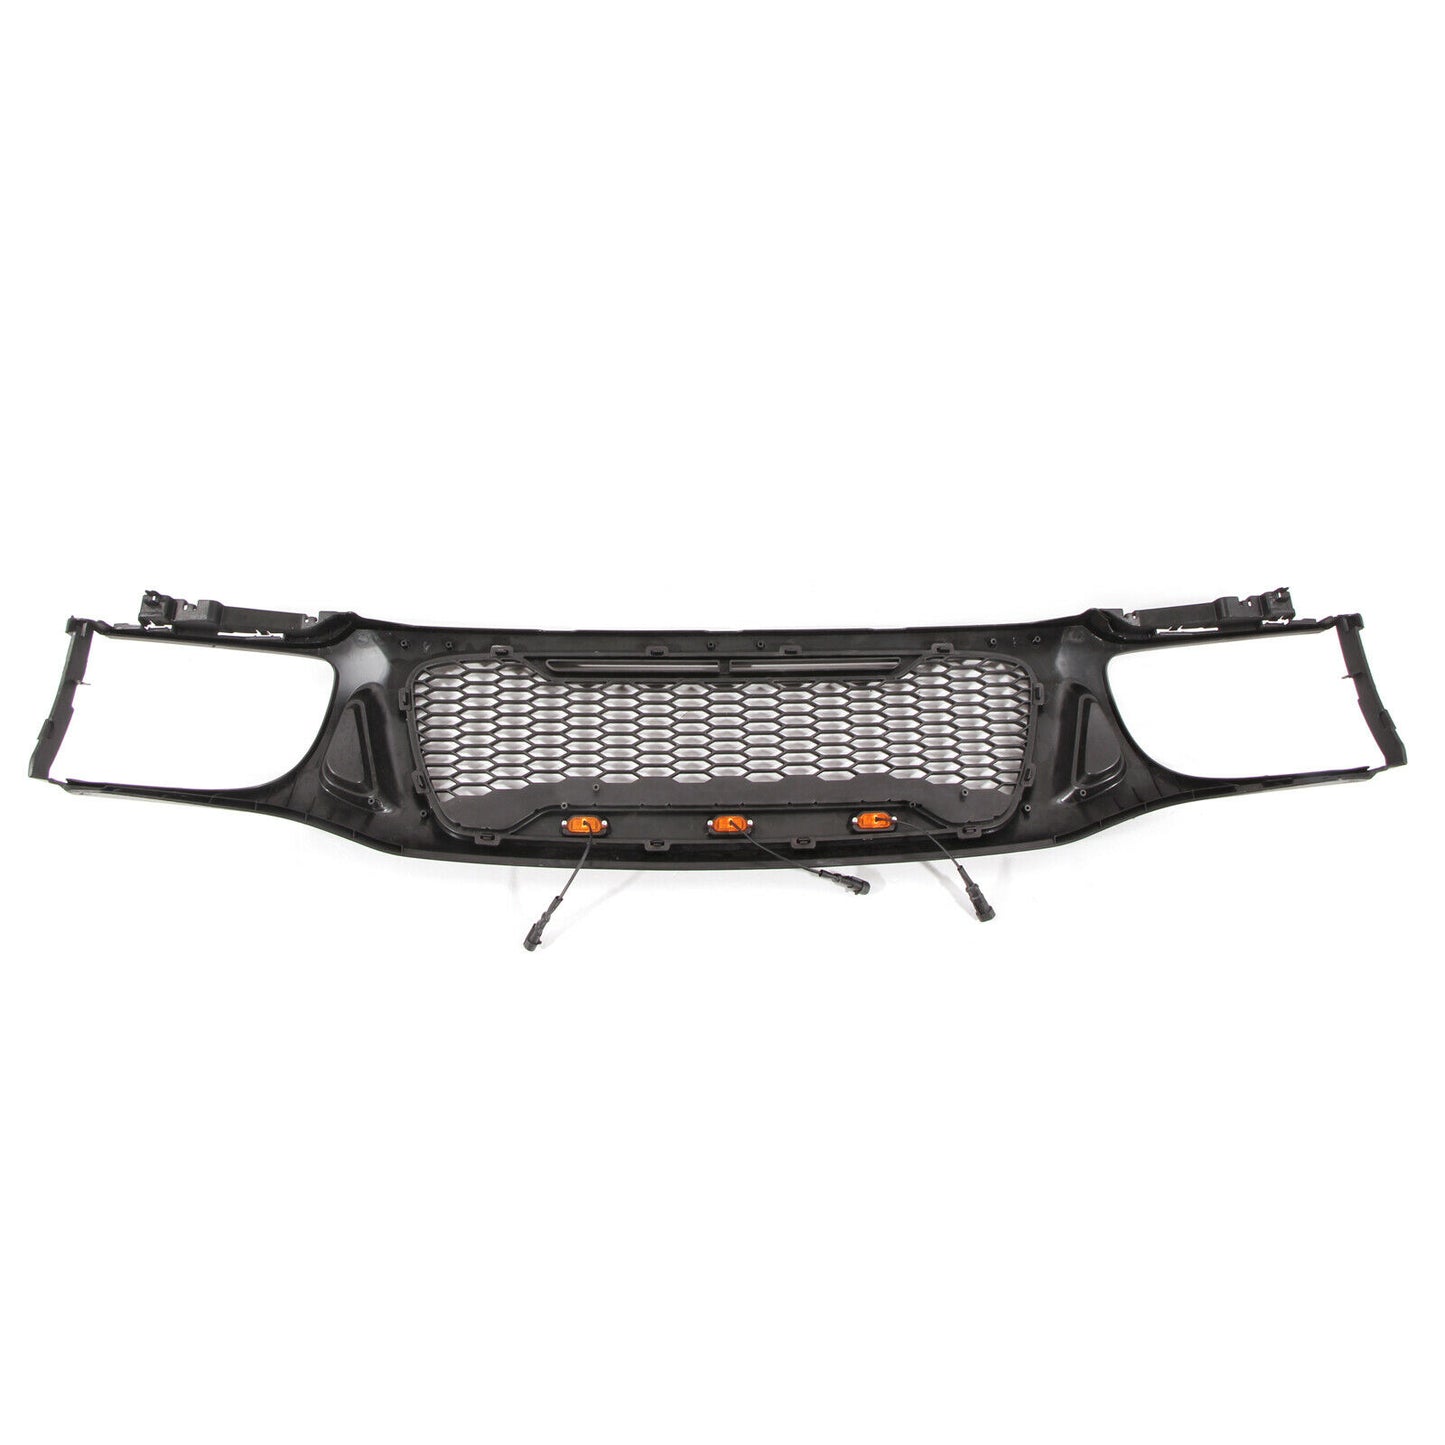 Mesh Grille Fit for 2001 2002 2003 2004 Toyota Tacoma Grill with 3 LED Lights